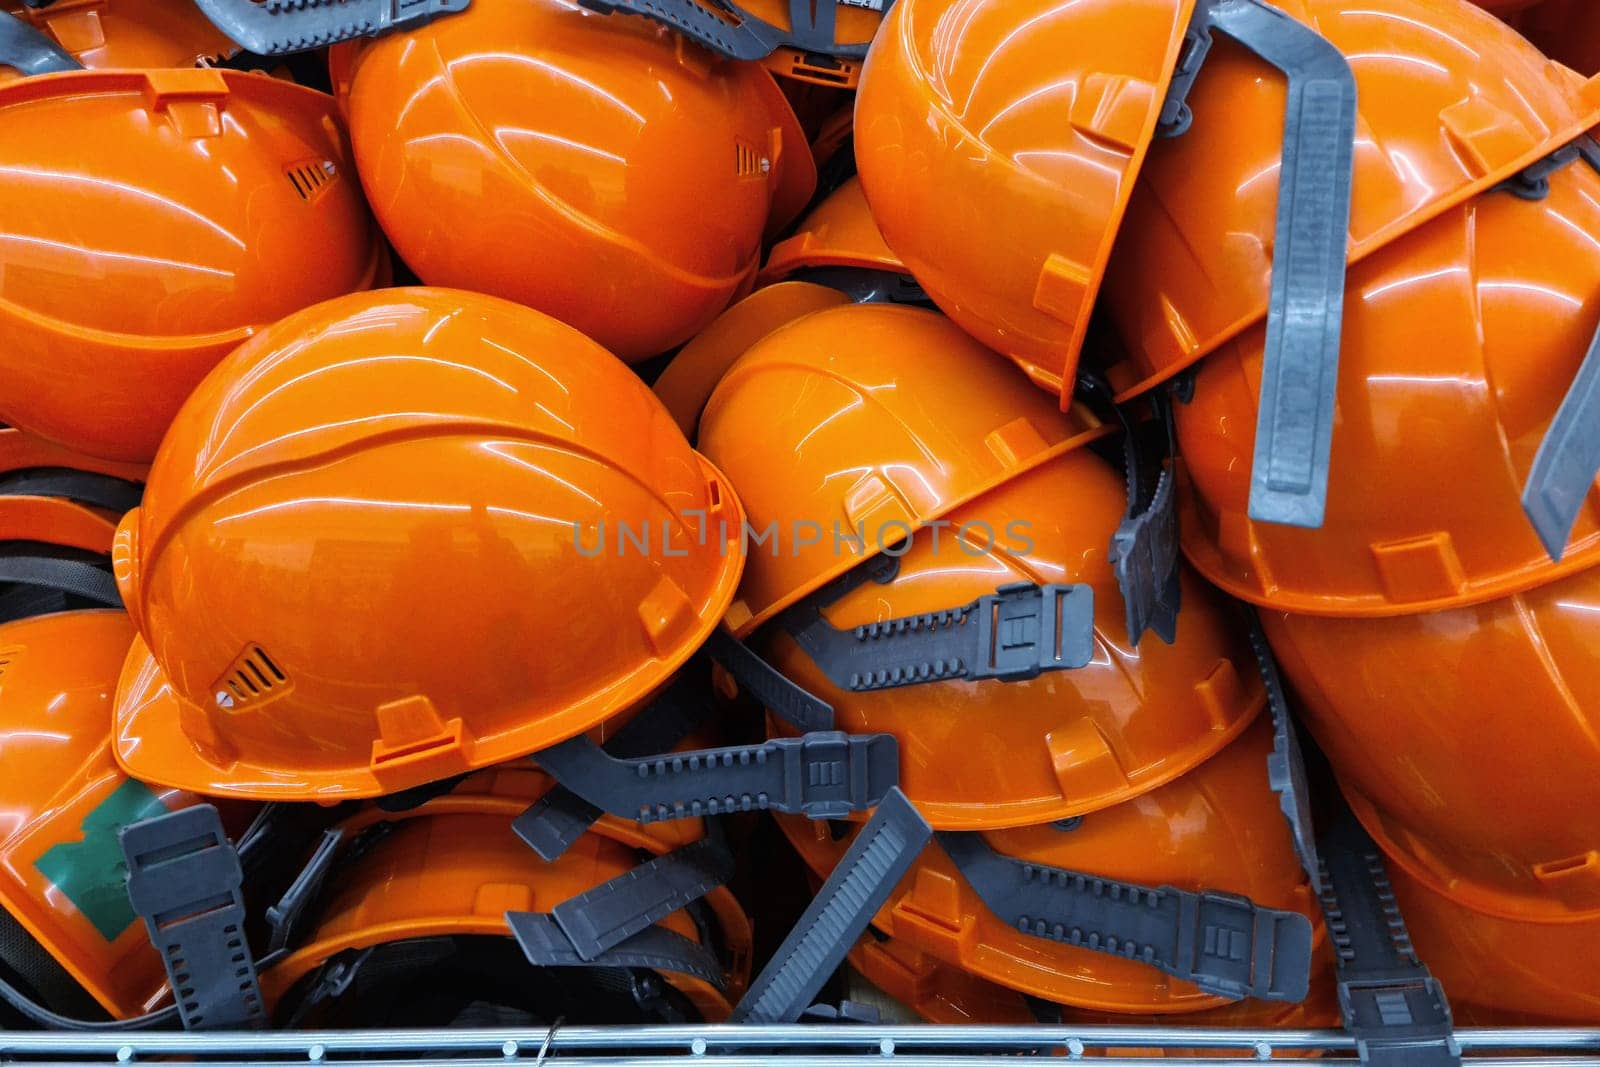 Many orange construction helmets lie on top of each other in a pile. Construction safety worker equipment.